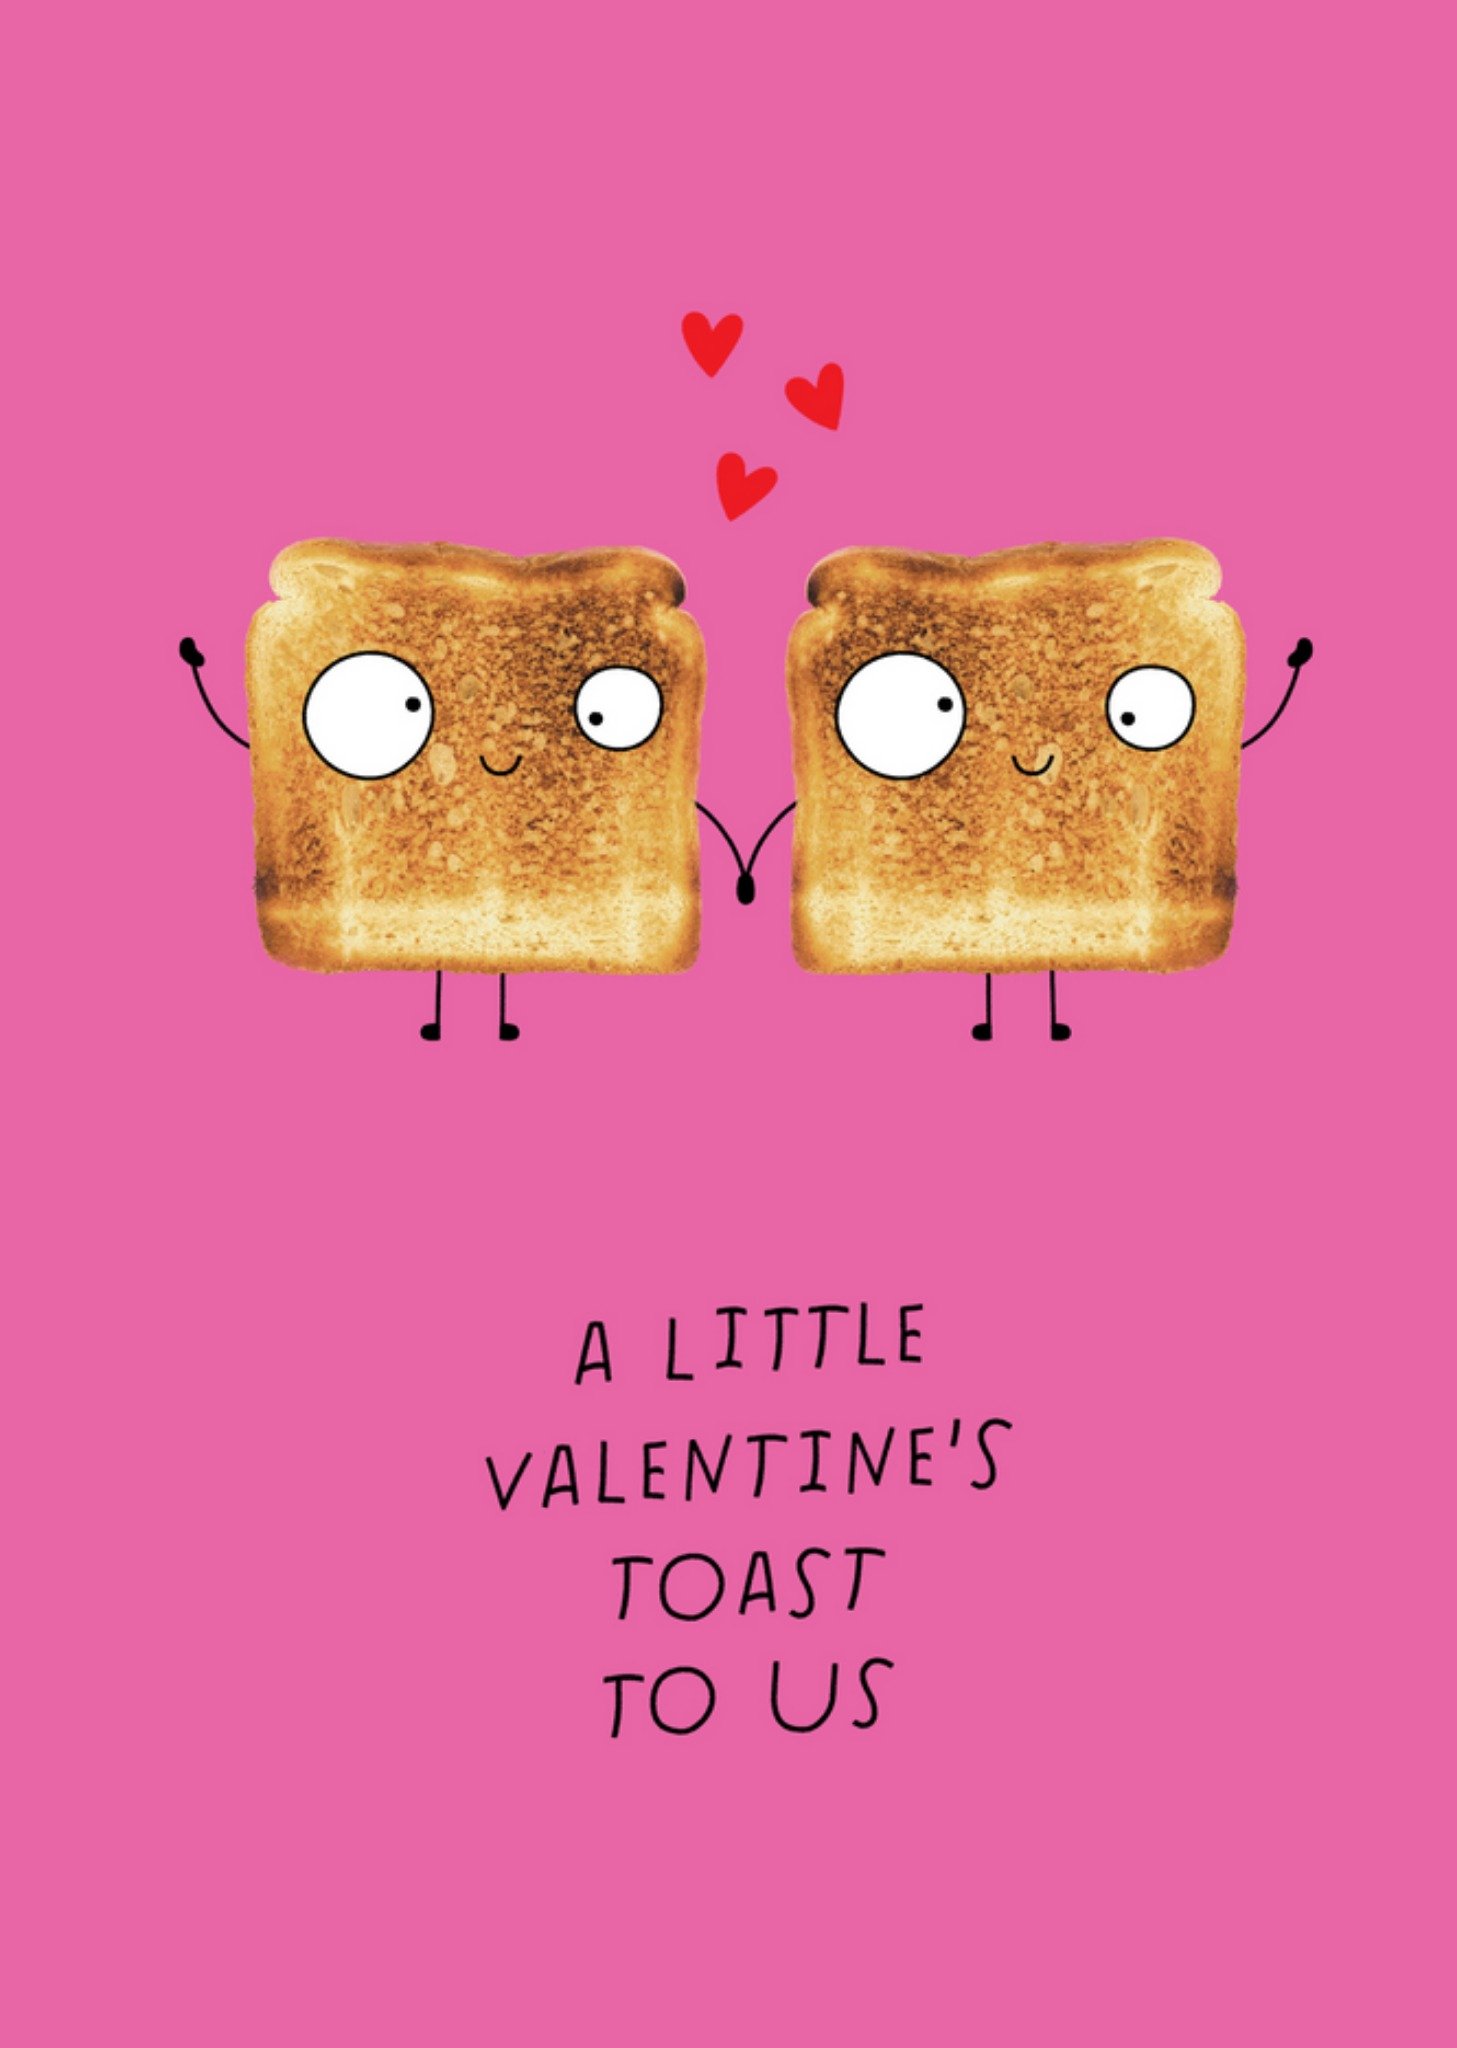 Moonpig Kate Smith Co. Little Toast Valentine's Day Card, Large